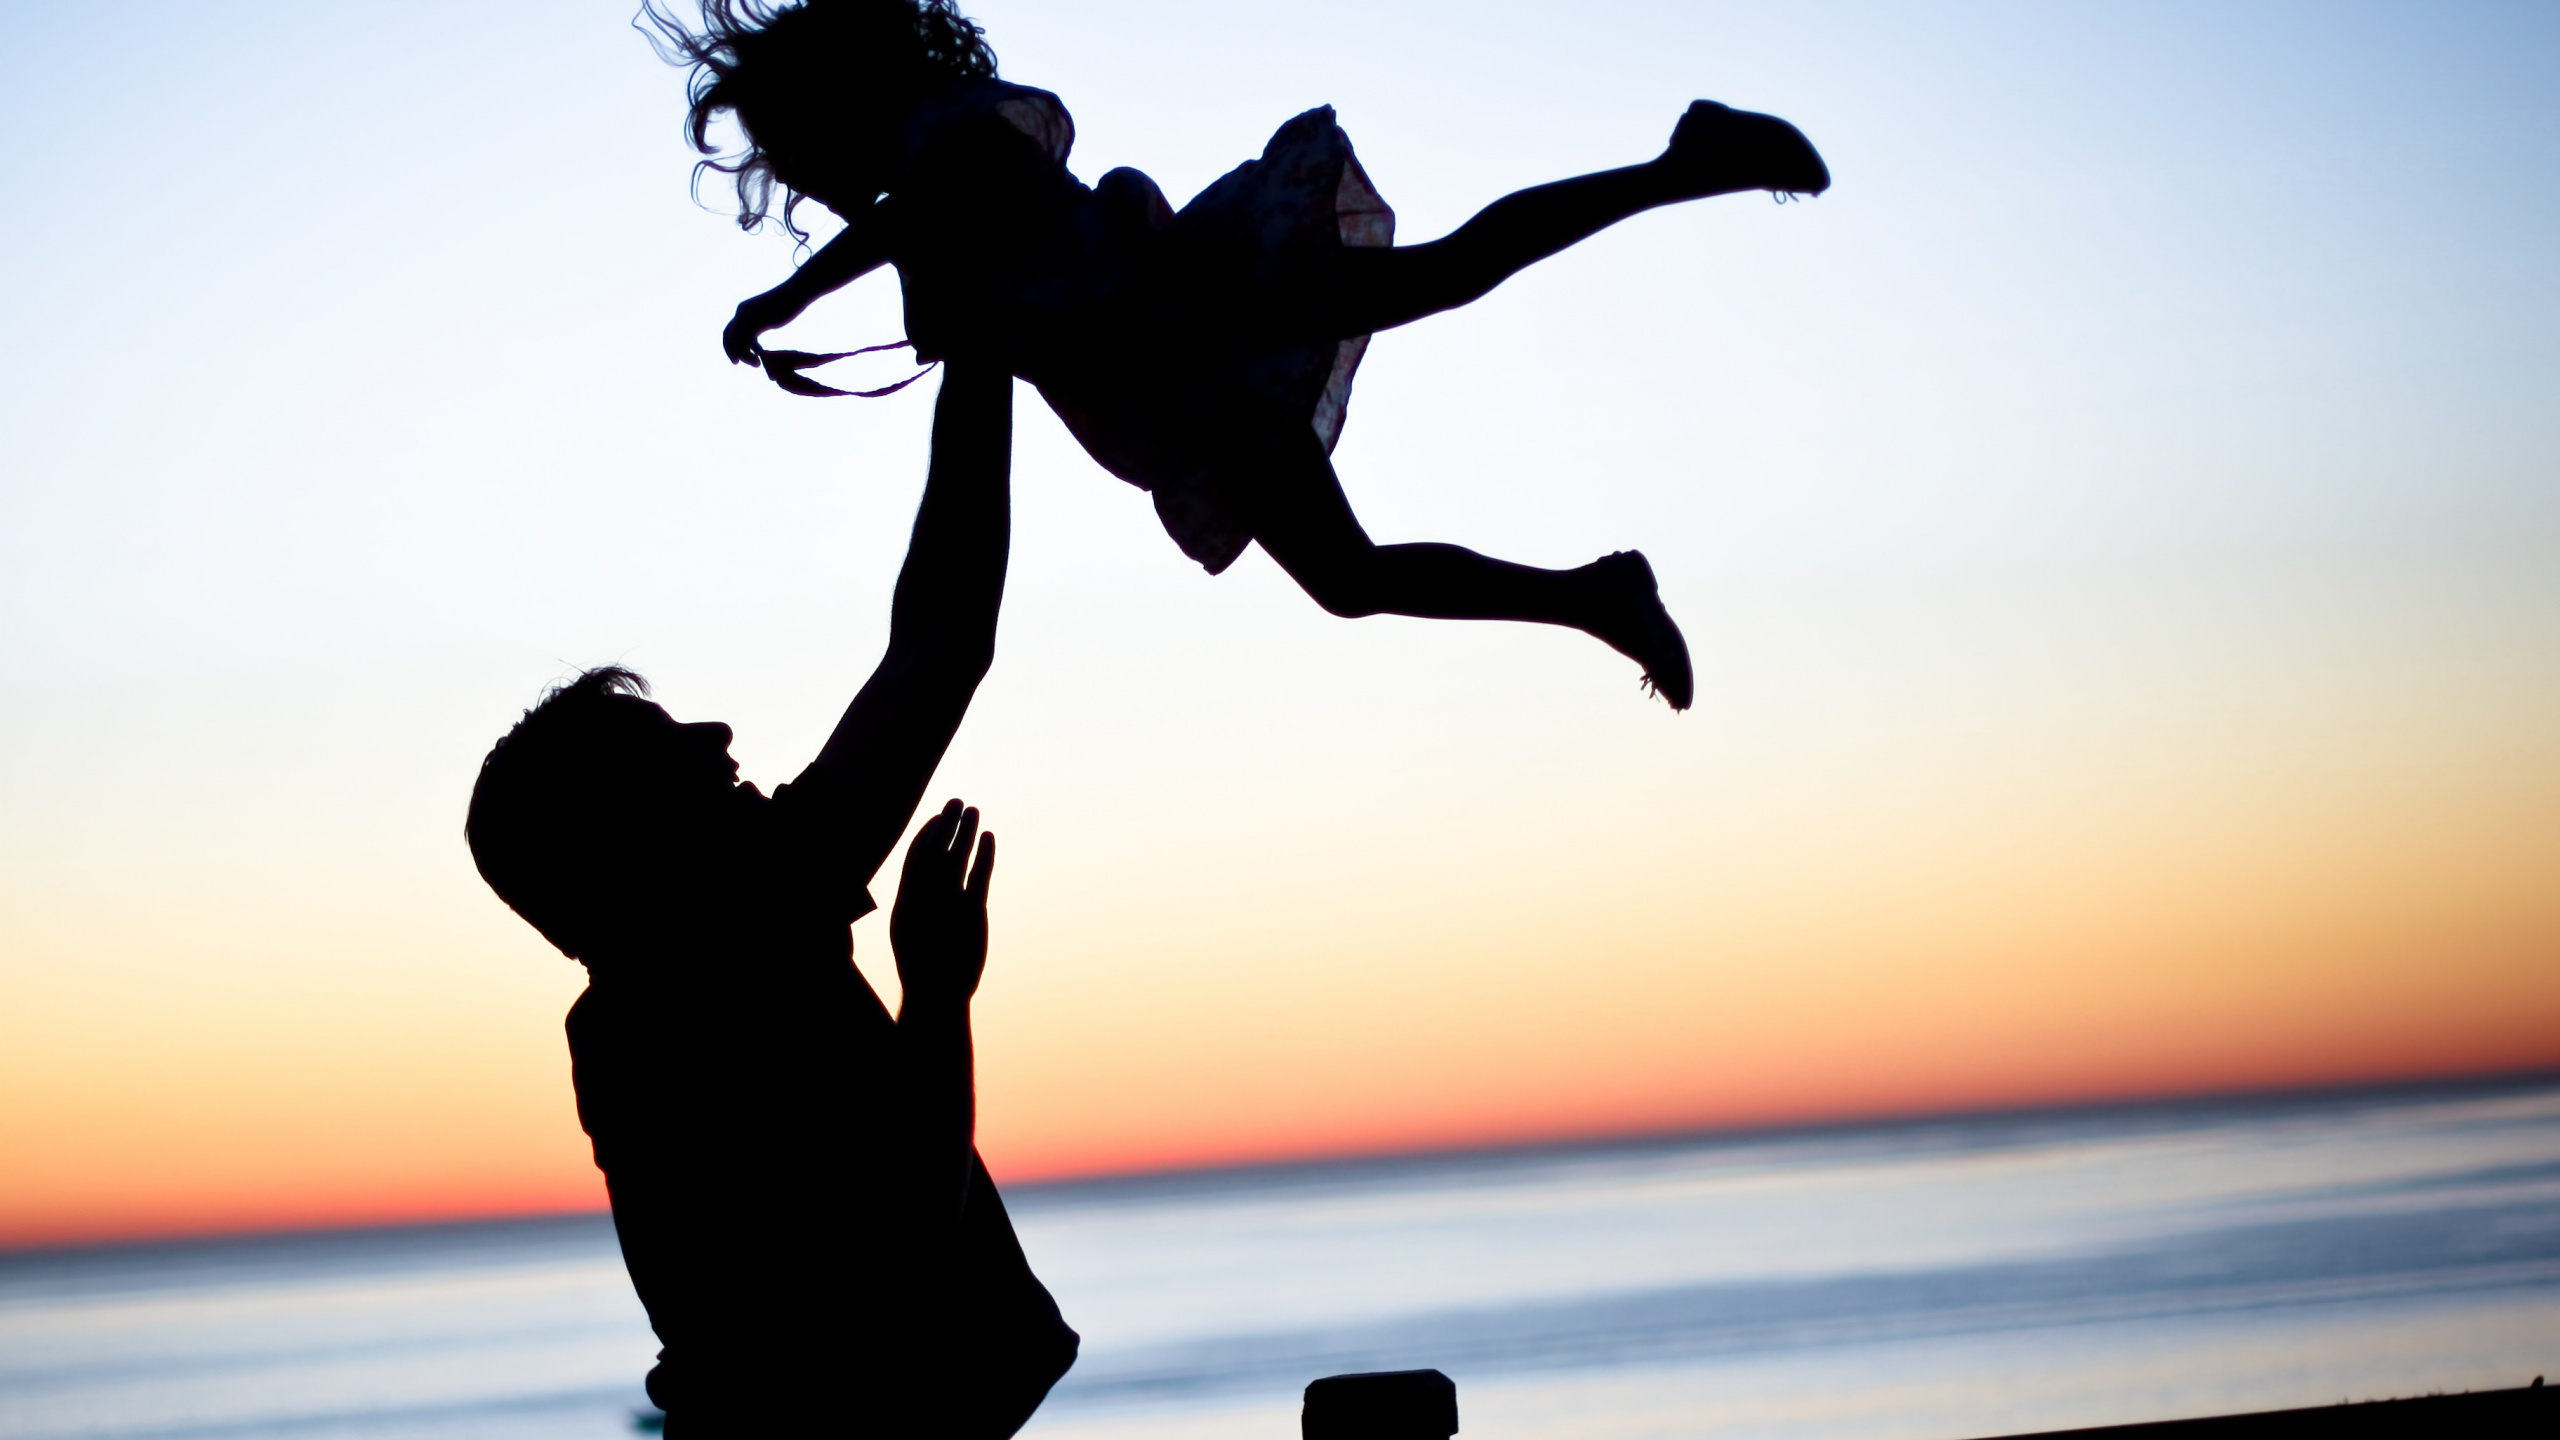 Father, Daughter, Family, People in Nature, Jumping. Wallpaper in 2560x1440 Resolution